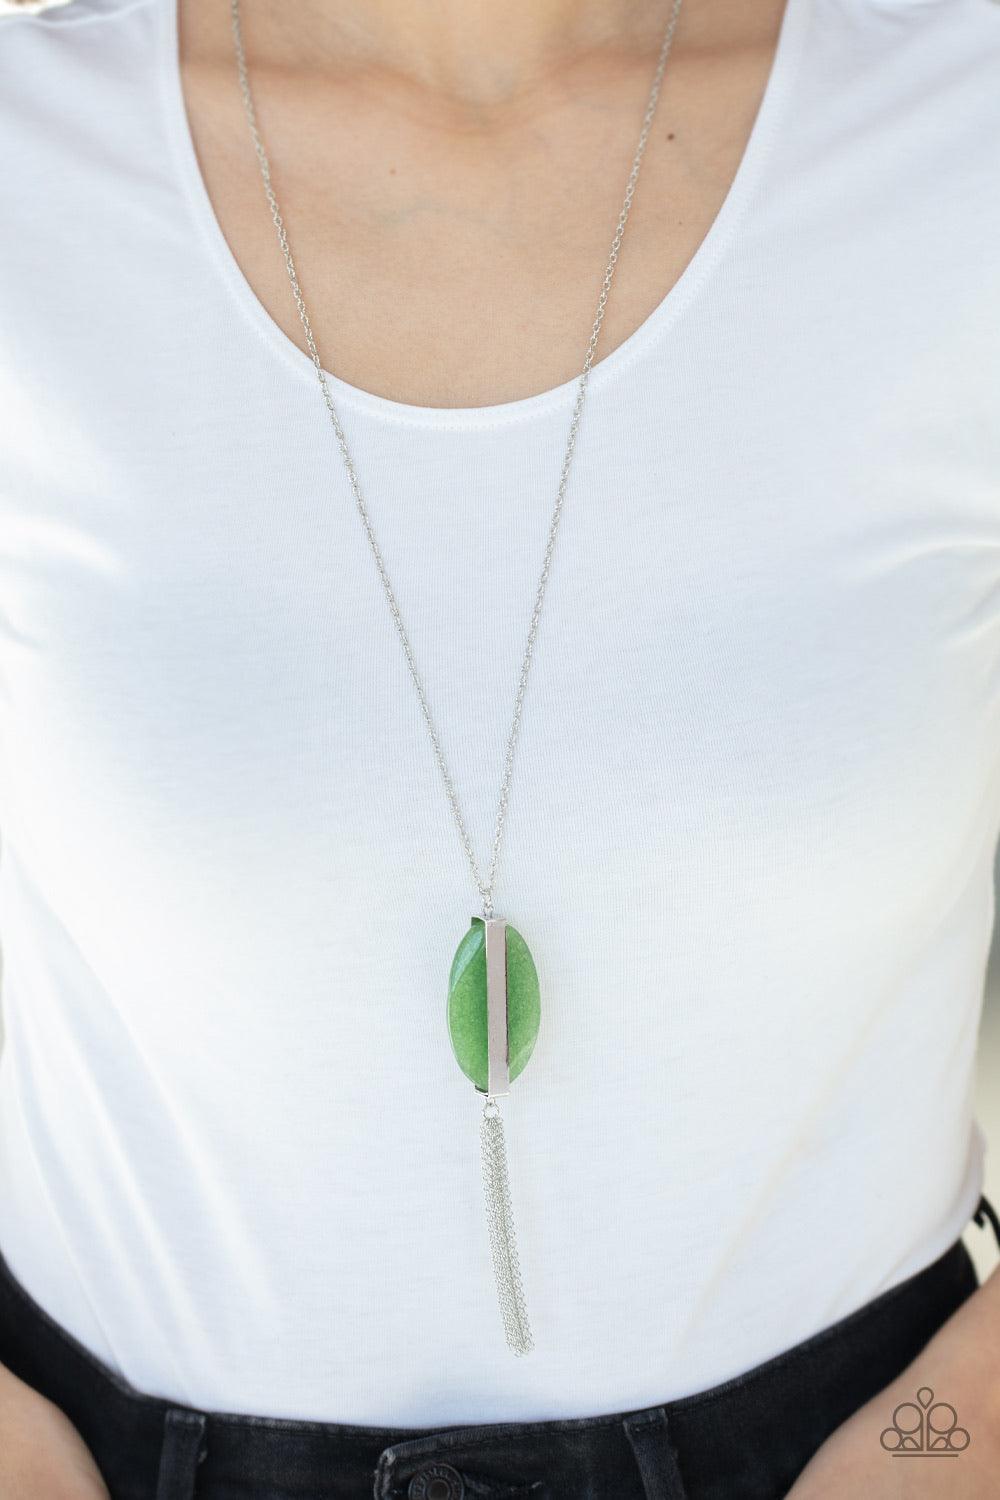 Paparazzi Accessories Tranquility Trend - Green Threaded through a rod, an earthy green stone sits inside a rectangular silver fitting, giving way to a shimmery silver chain tassel for a tranquil finish. Features an adjustable clasp closure. Jewelry